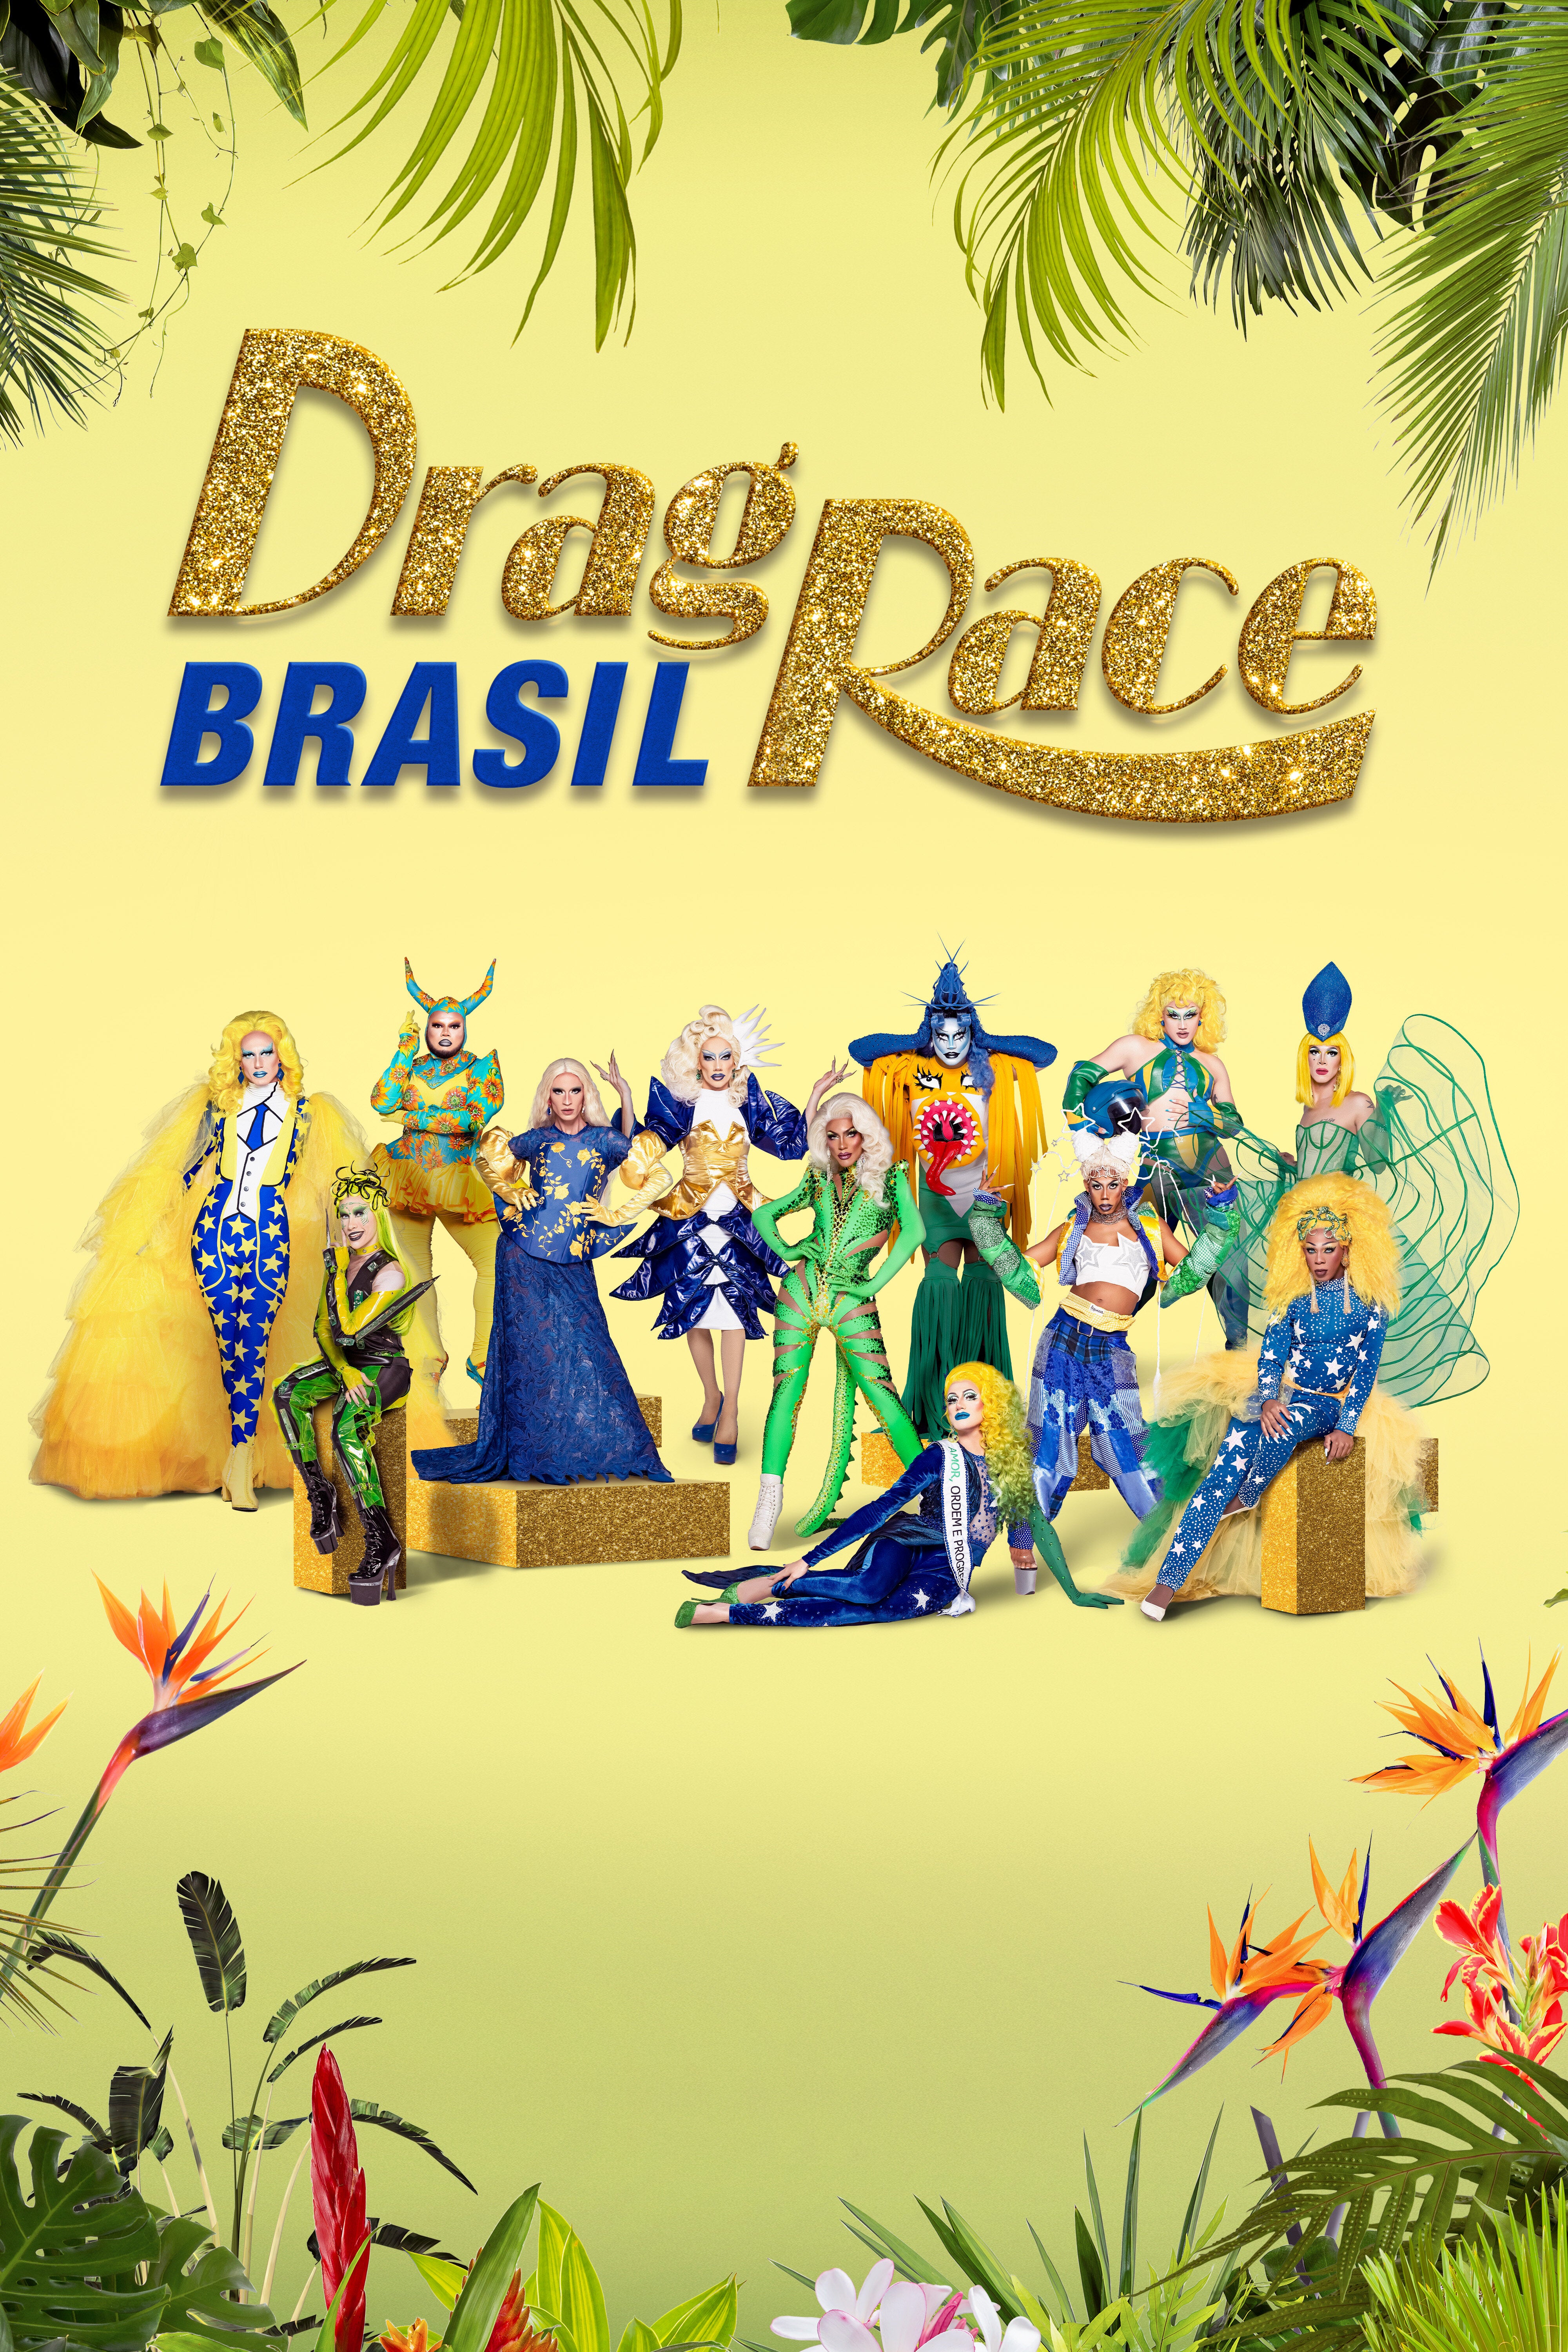 Drag Race Brasil (Paramount+): Canada daily TV audience insights for  smarter content decisions - Parrot Analytics